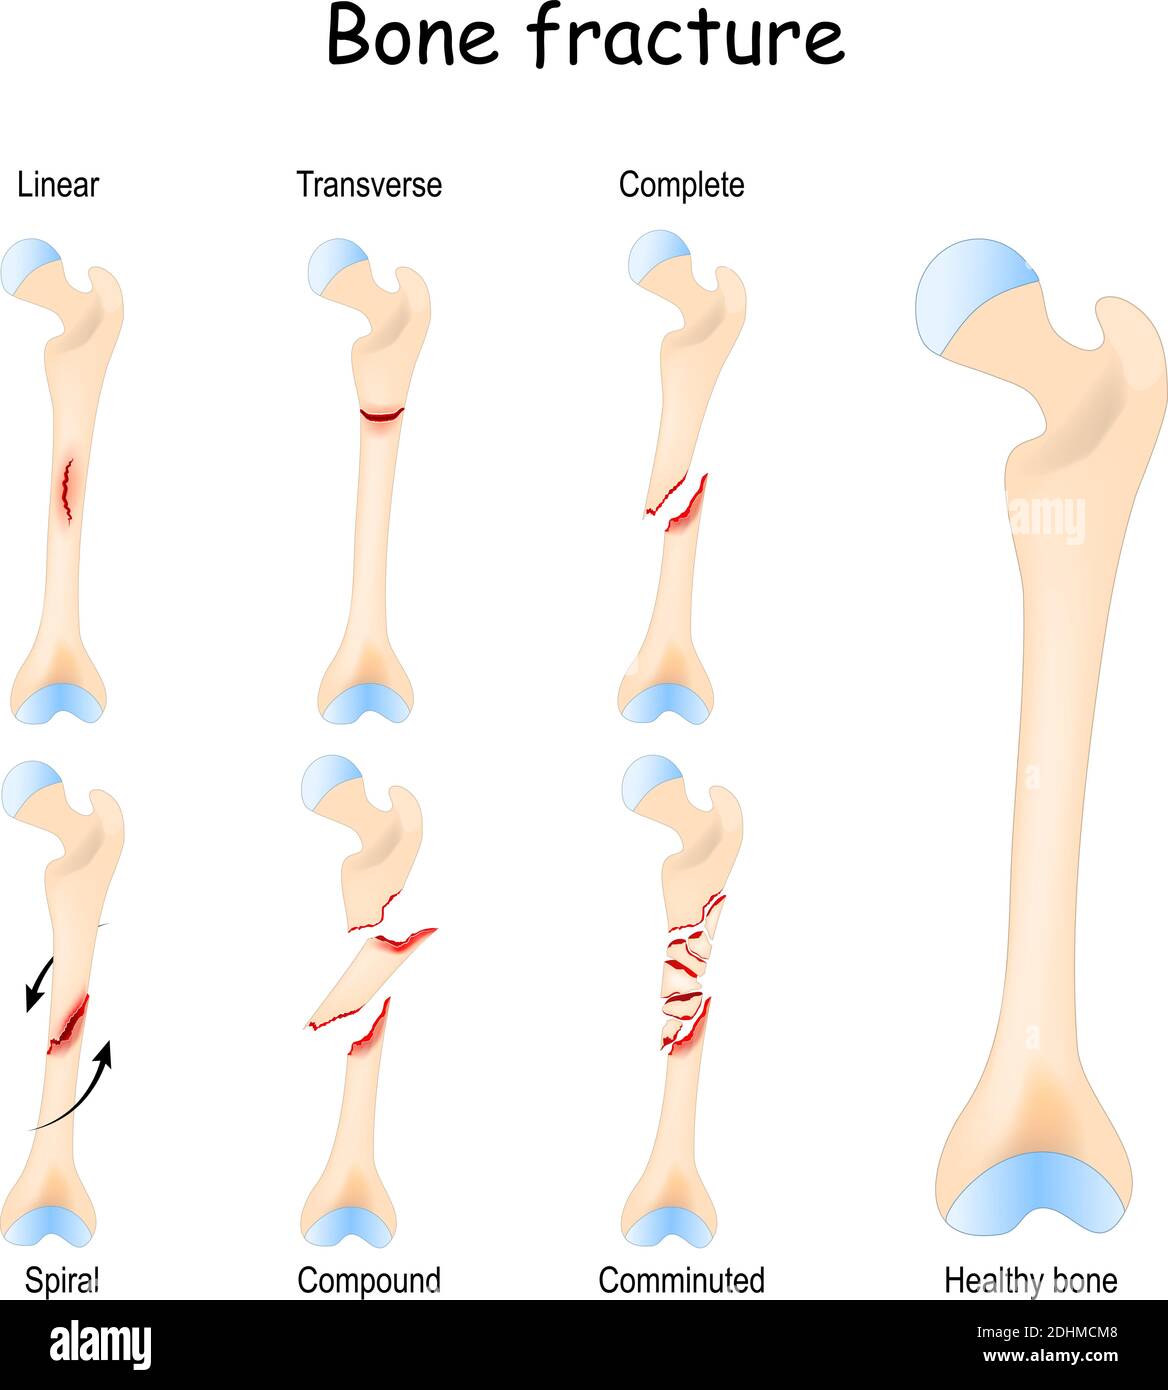 Typical bone fractures: Linear, Transverse, Complete, Compound, Spiral, and Comminuted. Healthy femur and leg fracture in different stages. Stock Vector